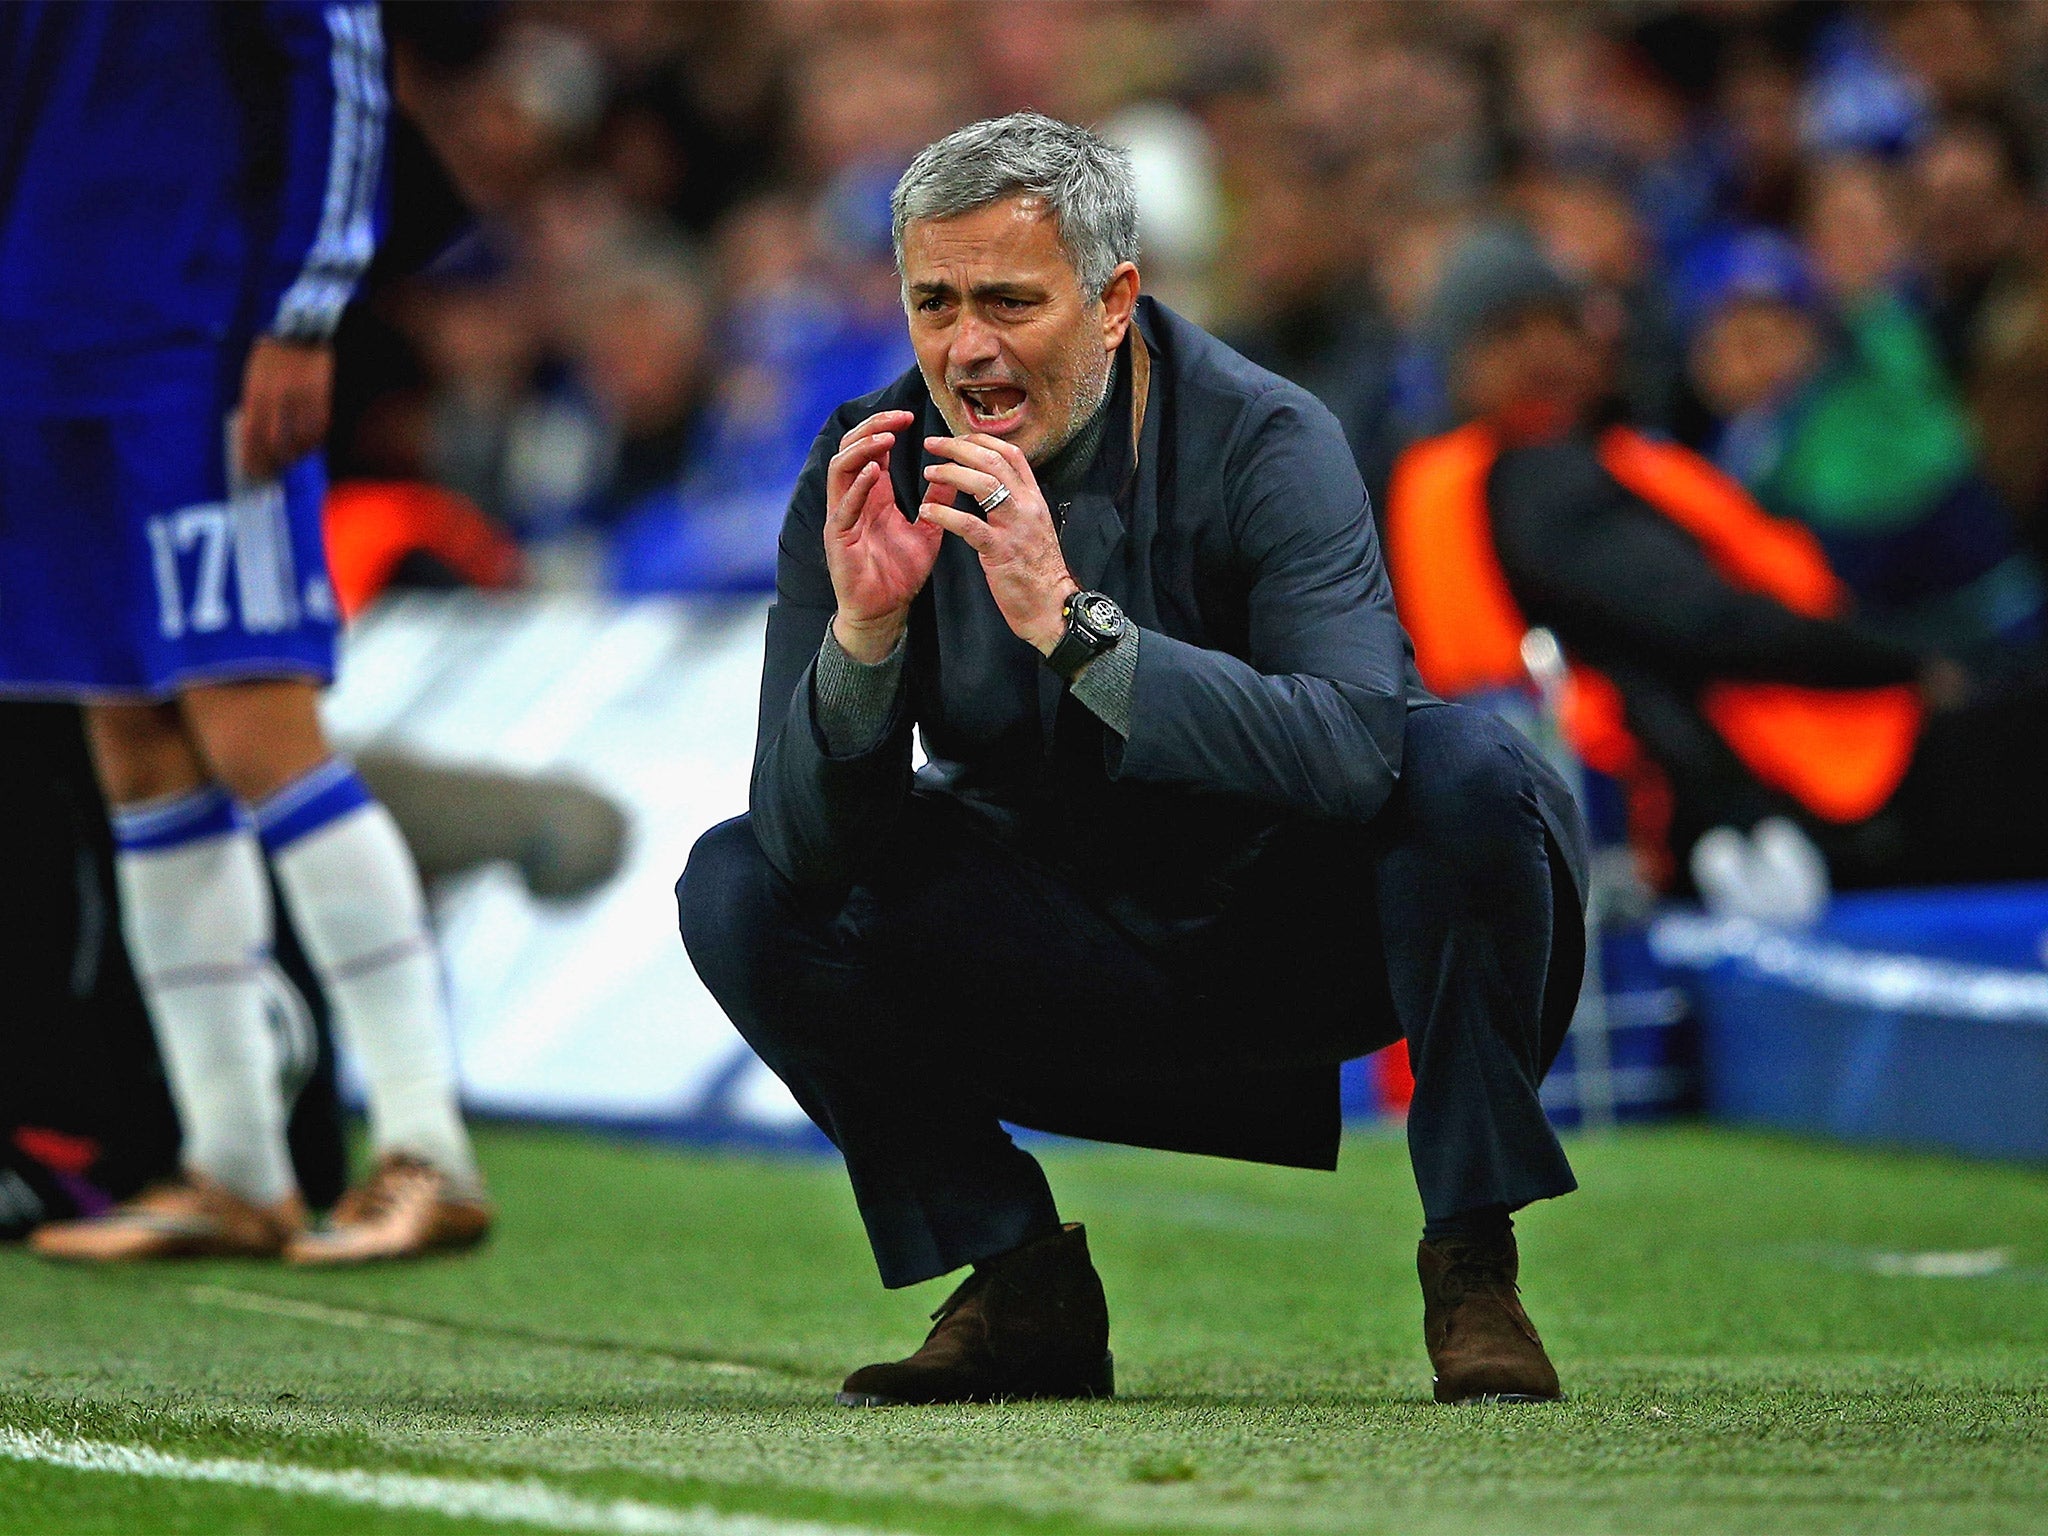 Jose Mourinho has refused to accept responsibility for Chelsea’s struggles and has instead turned on his players